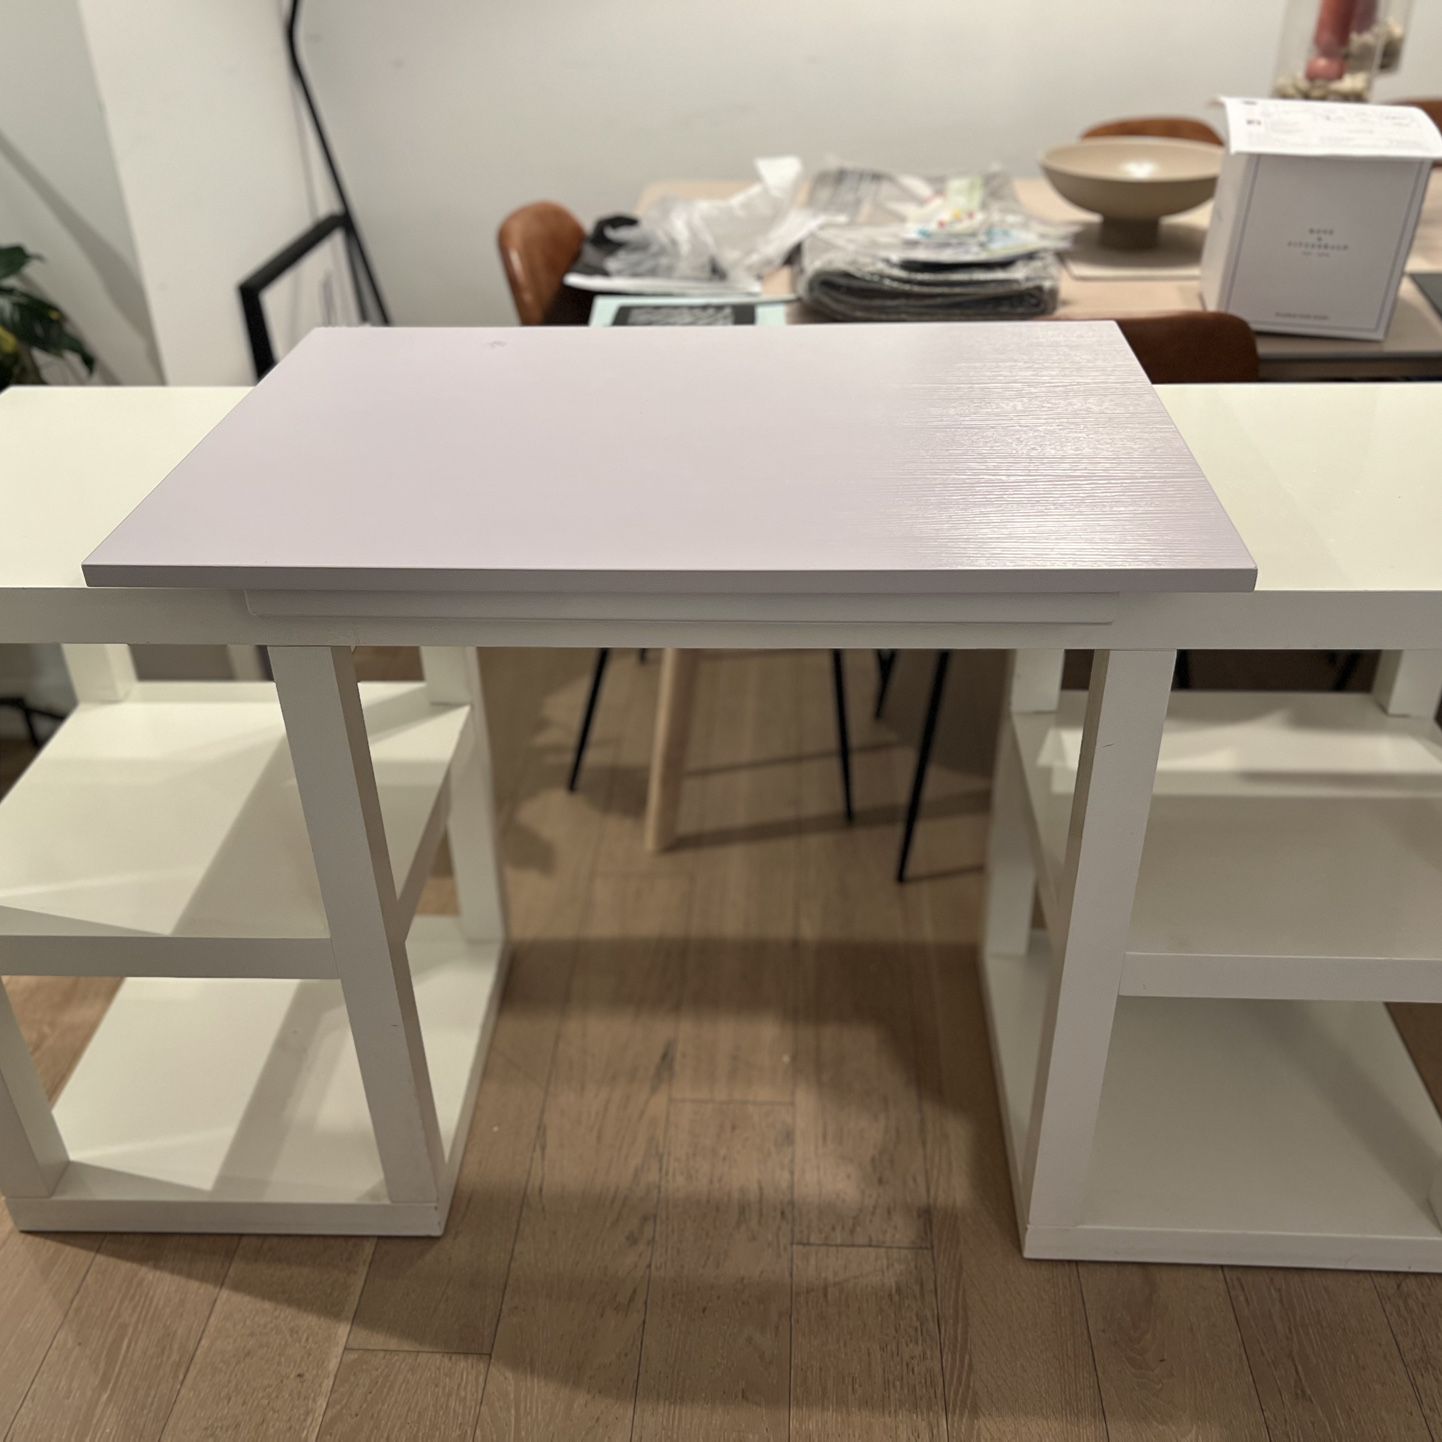 Table With  Standing Desk